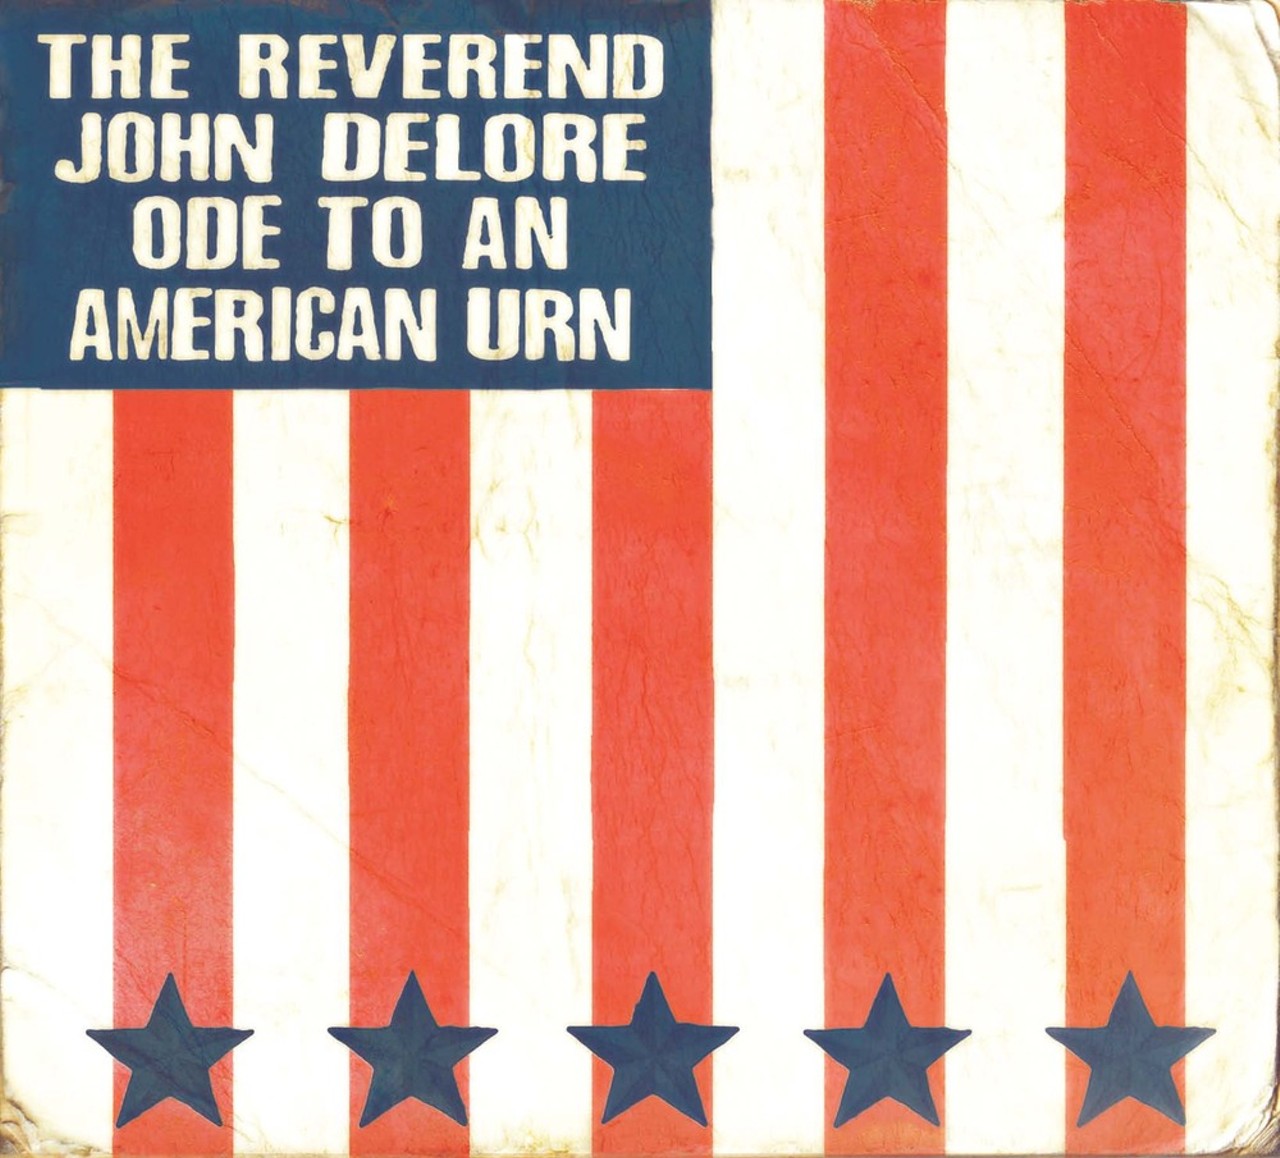 The Reverend John Delore - Ode to an American Urn (2009)
The Reverend John Delore's 2009 debut album is really, really Americana. Listen to Ode to an American Urn here. With lines like "I been up and down the country with a suitcase in my hand / Through the fields and factories, but my baby doesn&rsquo;t understand," how can it not be more American?